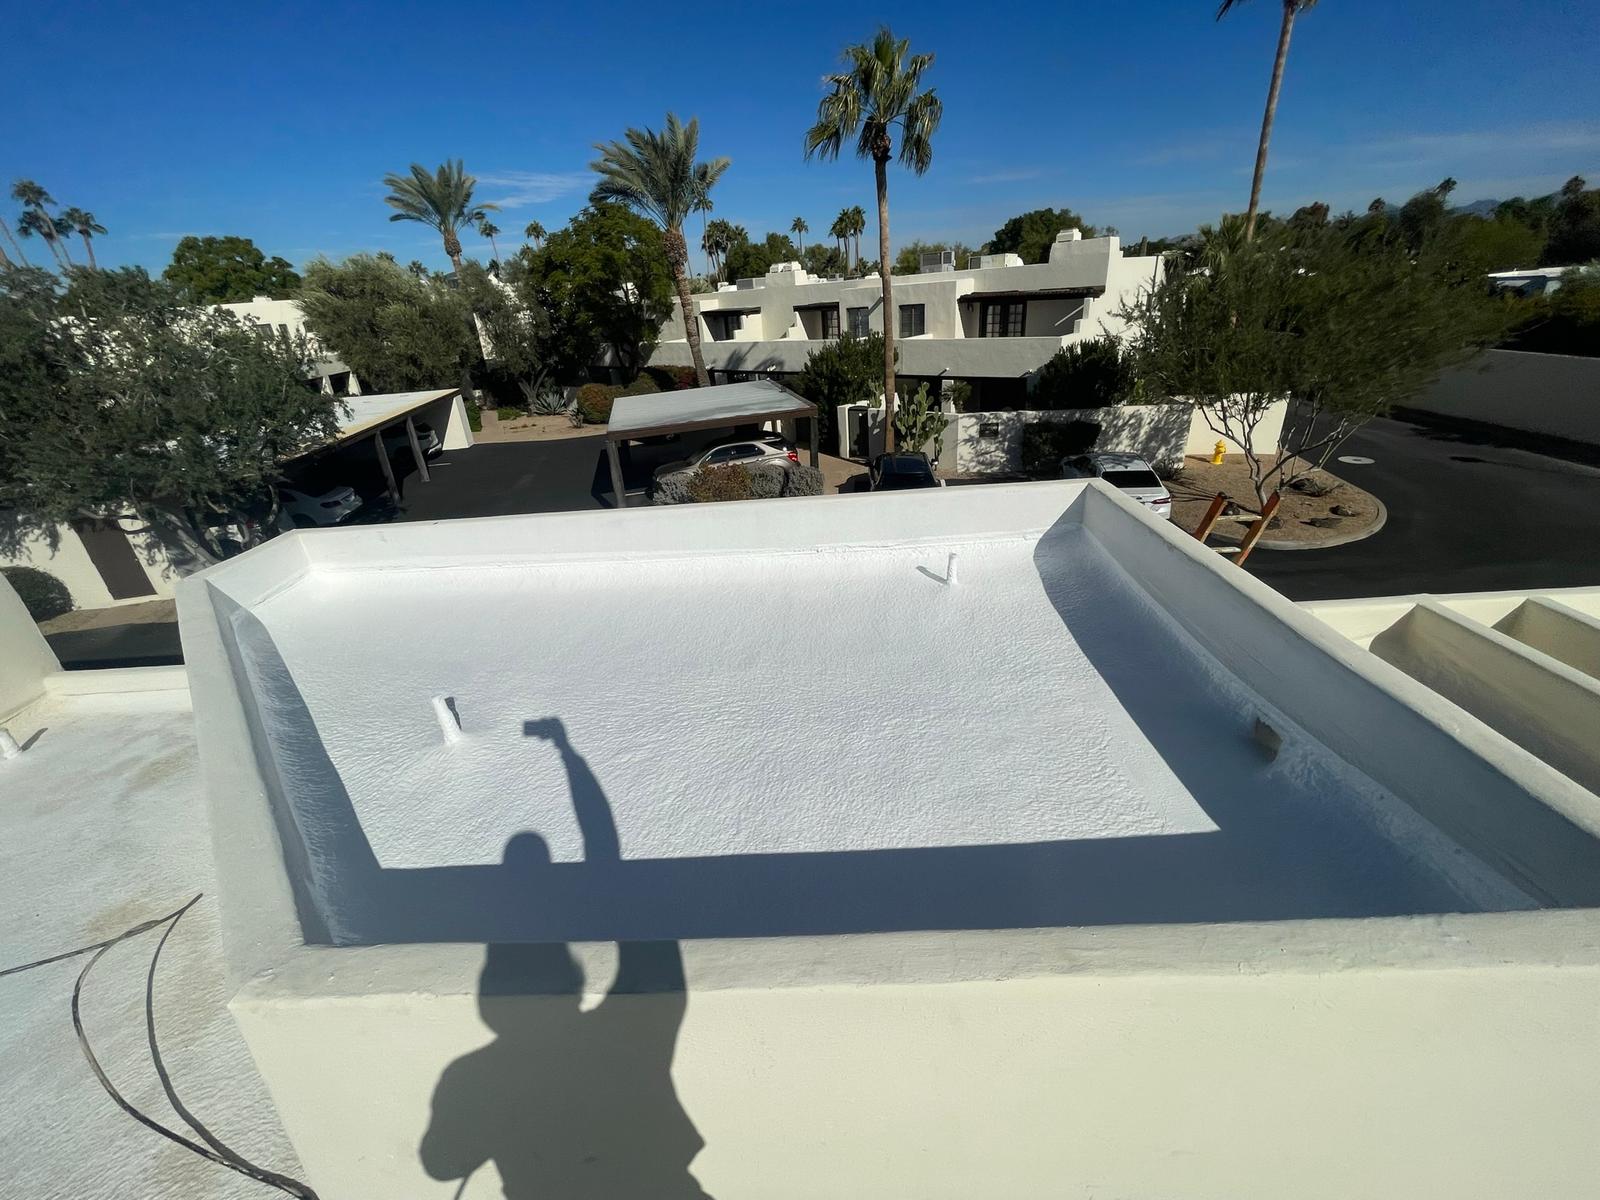 A white roof with a palm tree in the background. Contact Behmer roofing contractor for quality roof installations and repairs in AZ.